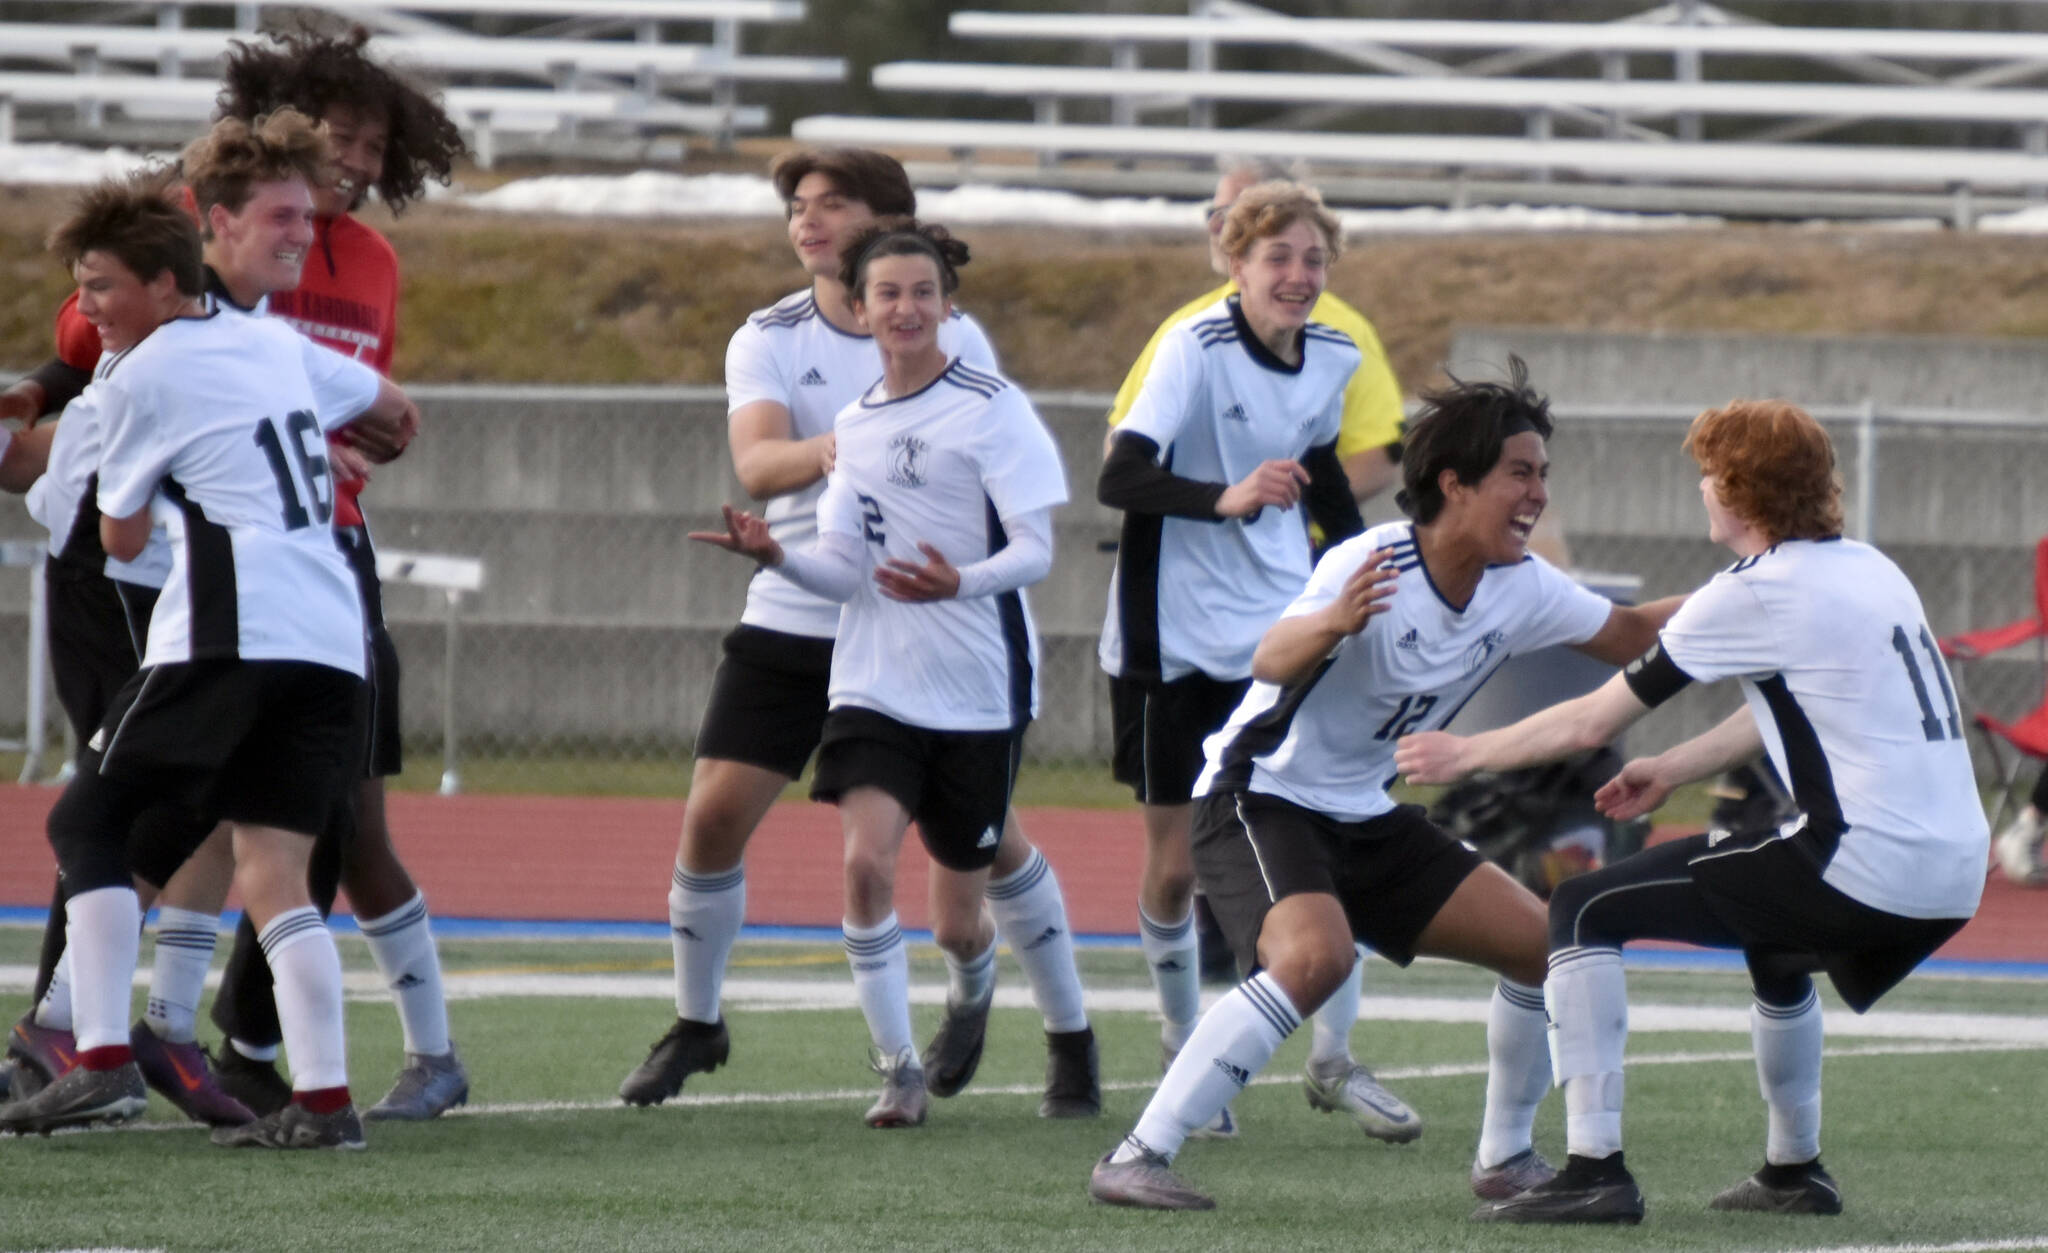 The Kenai Central boys soccer team celebrates victory Saturday, May 20, 2023, in the championship game of the Peninsula Conference tournament at Justin Maile Field at Soldotna High School in Soldotna, Alaska. (Photo by Jeff Helminiak/Peninsula Clarion)